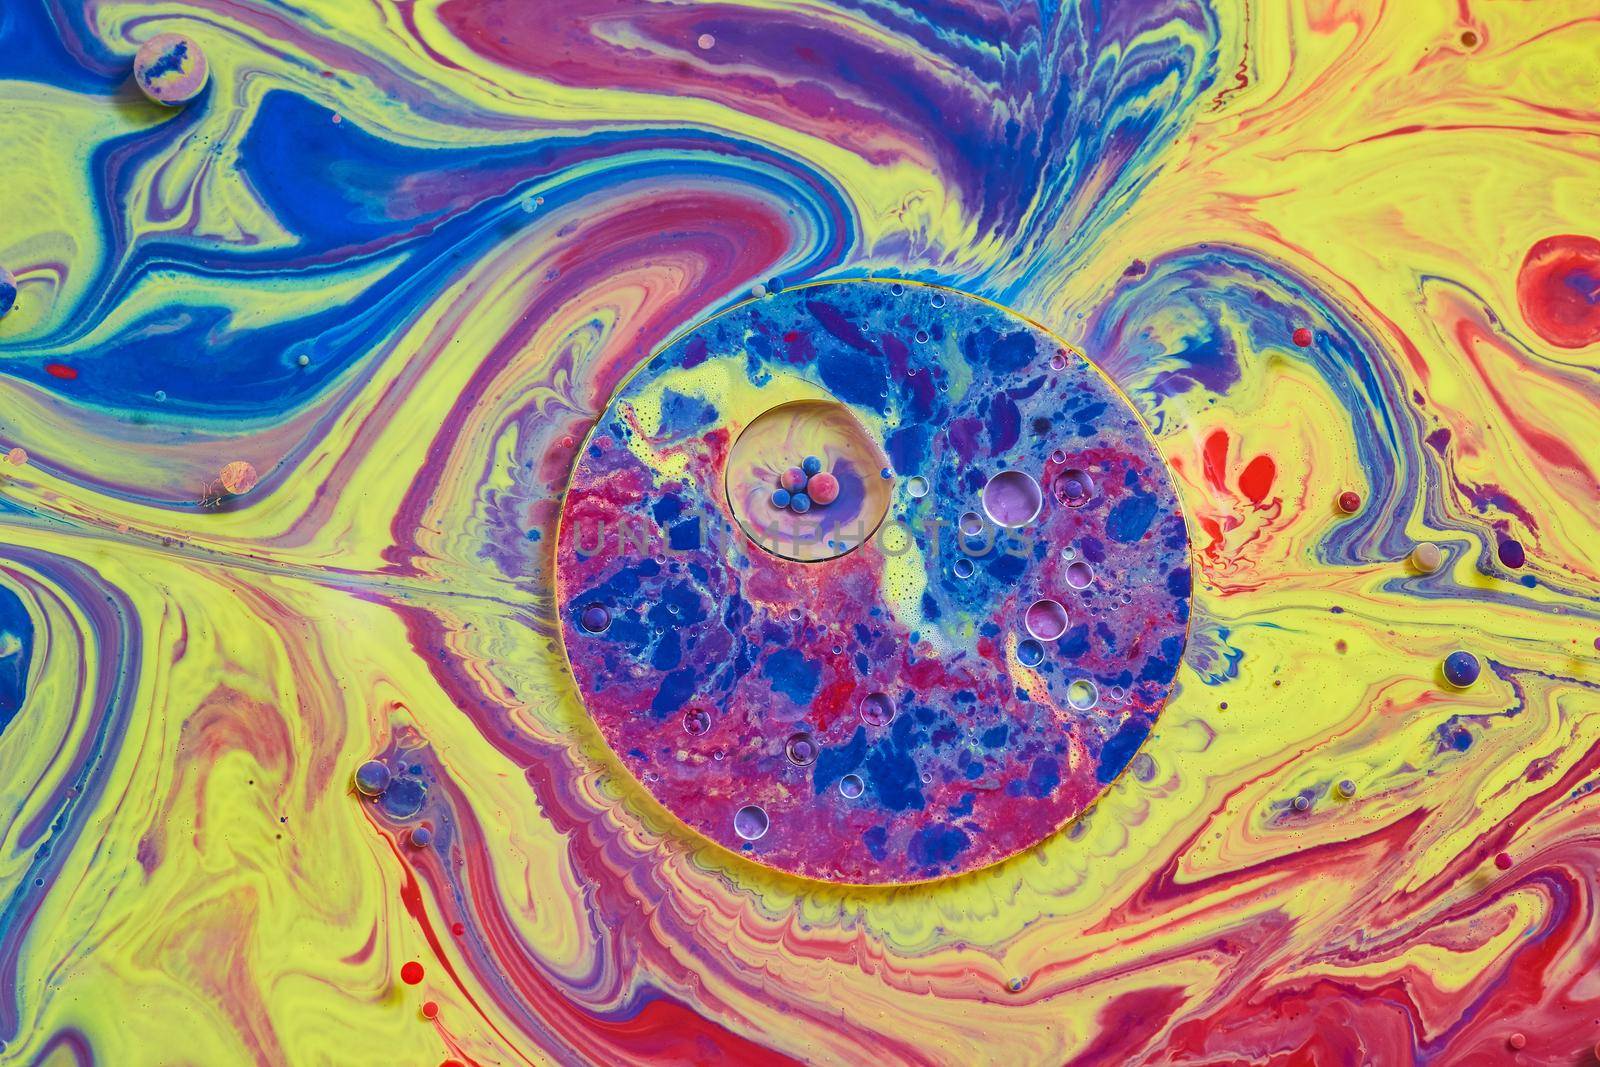 Swirling rainbow colors on surface of liquid with circle patterns and tiny spheres by njproductions